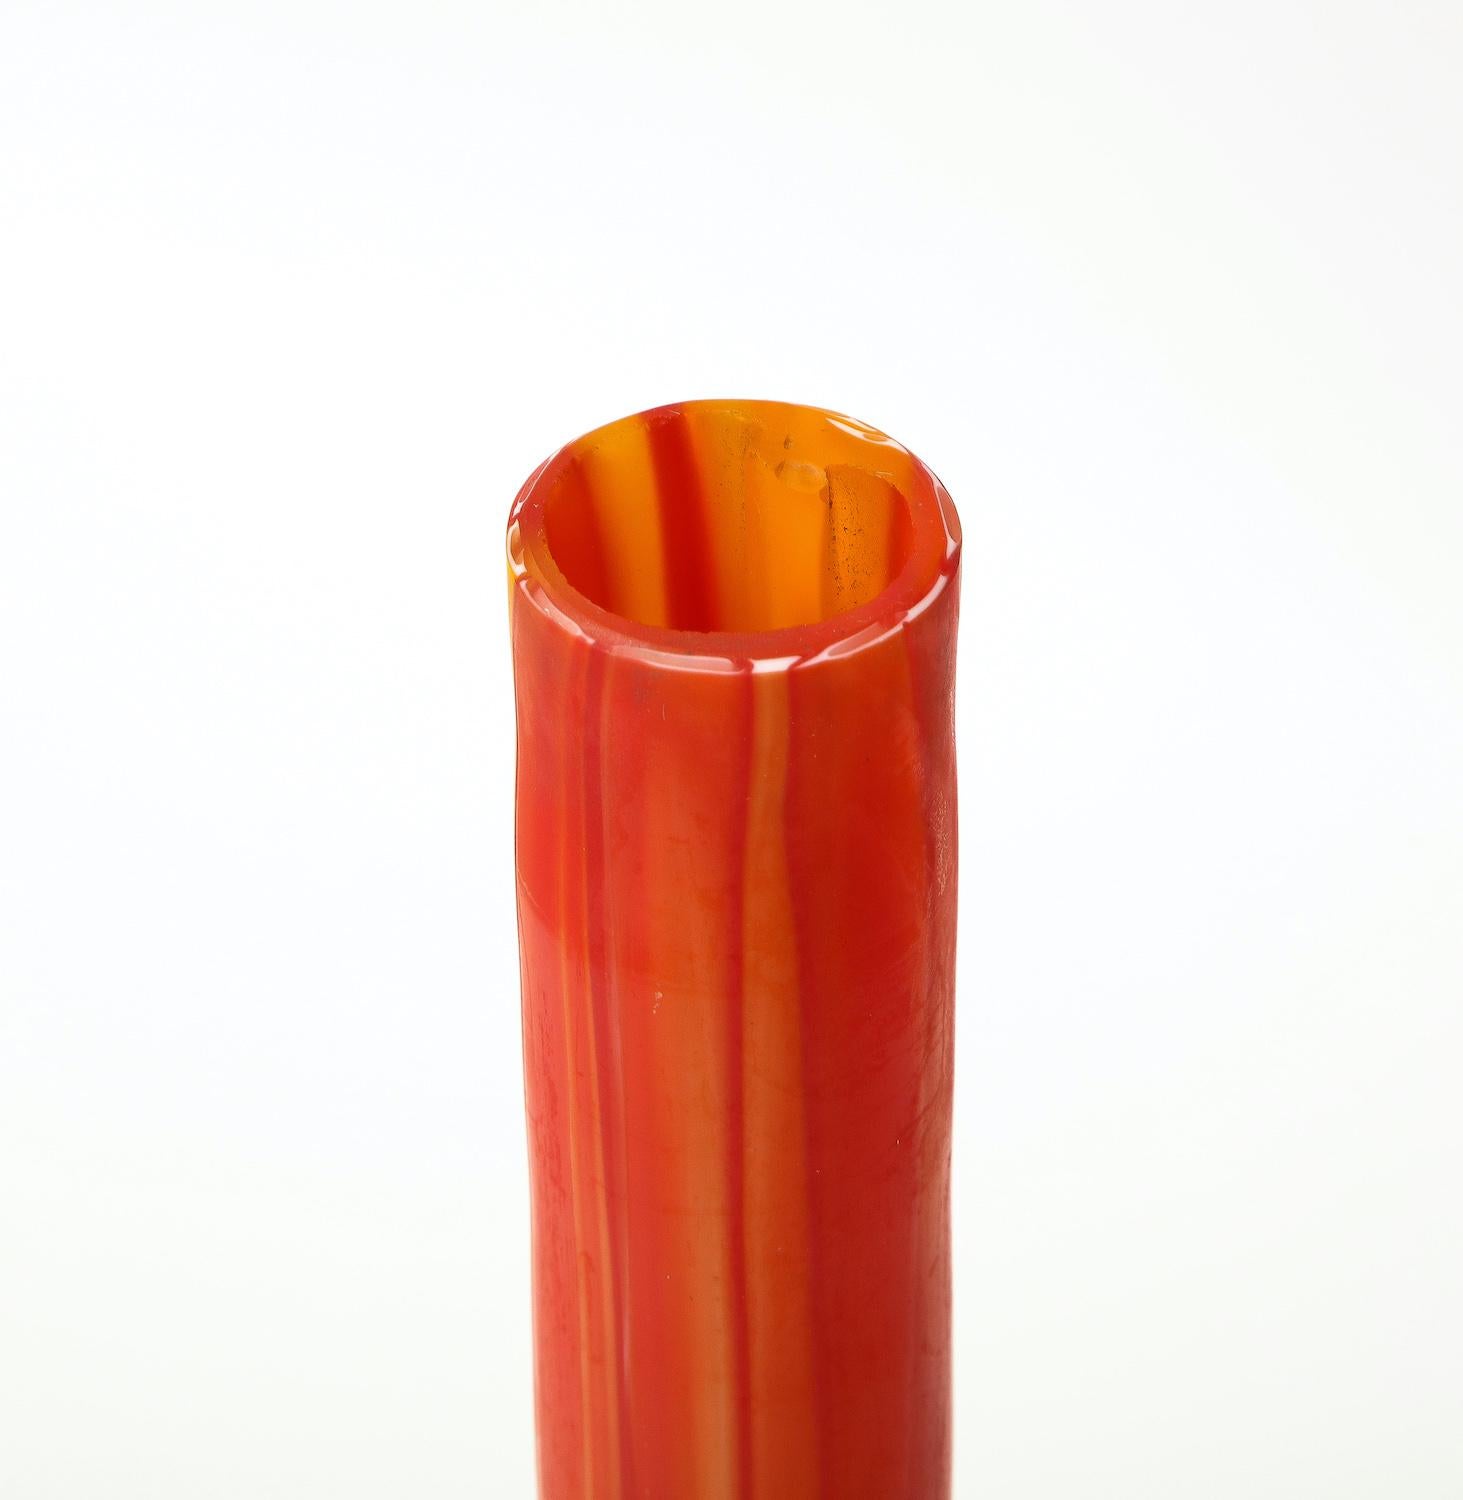 Blown glass. Bottle form sculpture of vibrantly colored opaque glass and a great scale. This object does not have a bottom, does not hold liquid & is purely a sculpture.